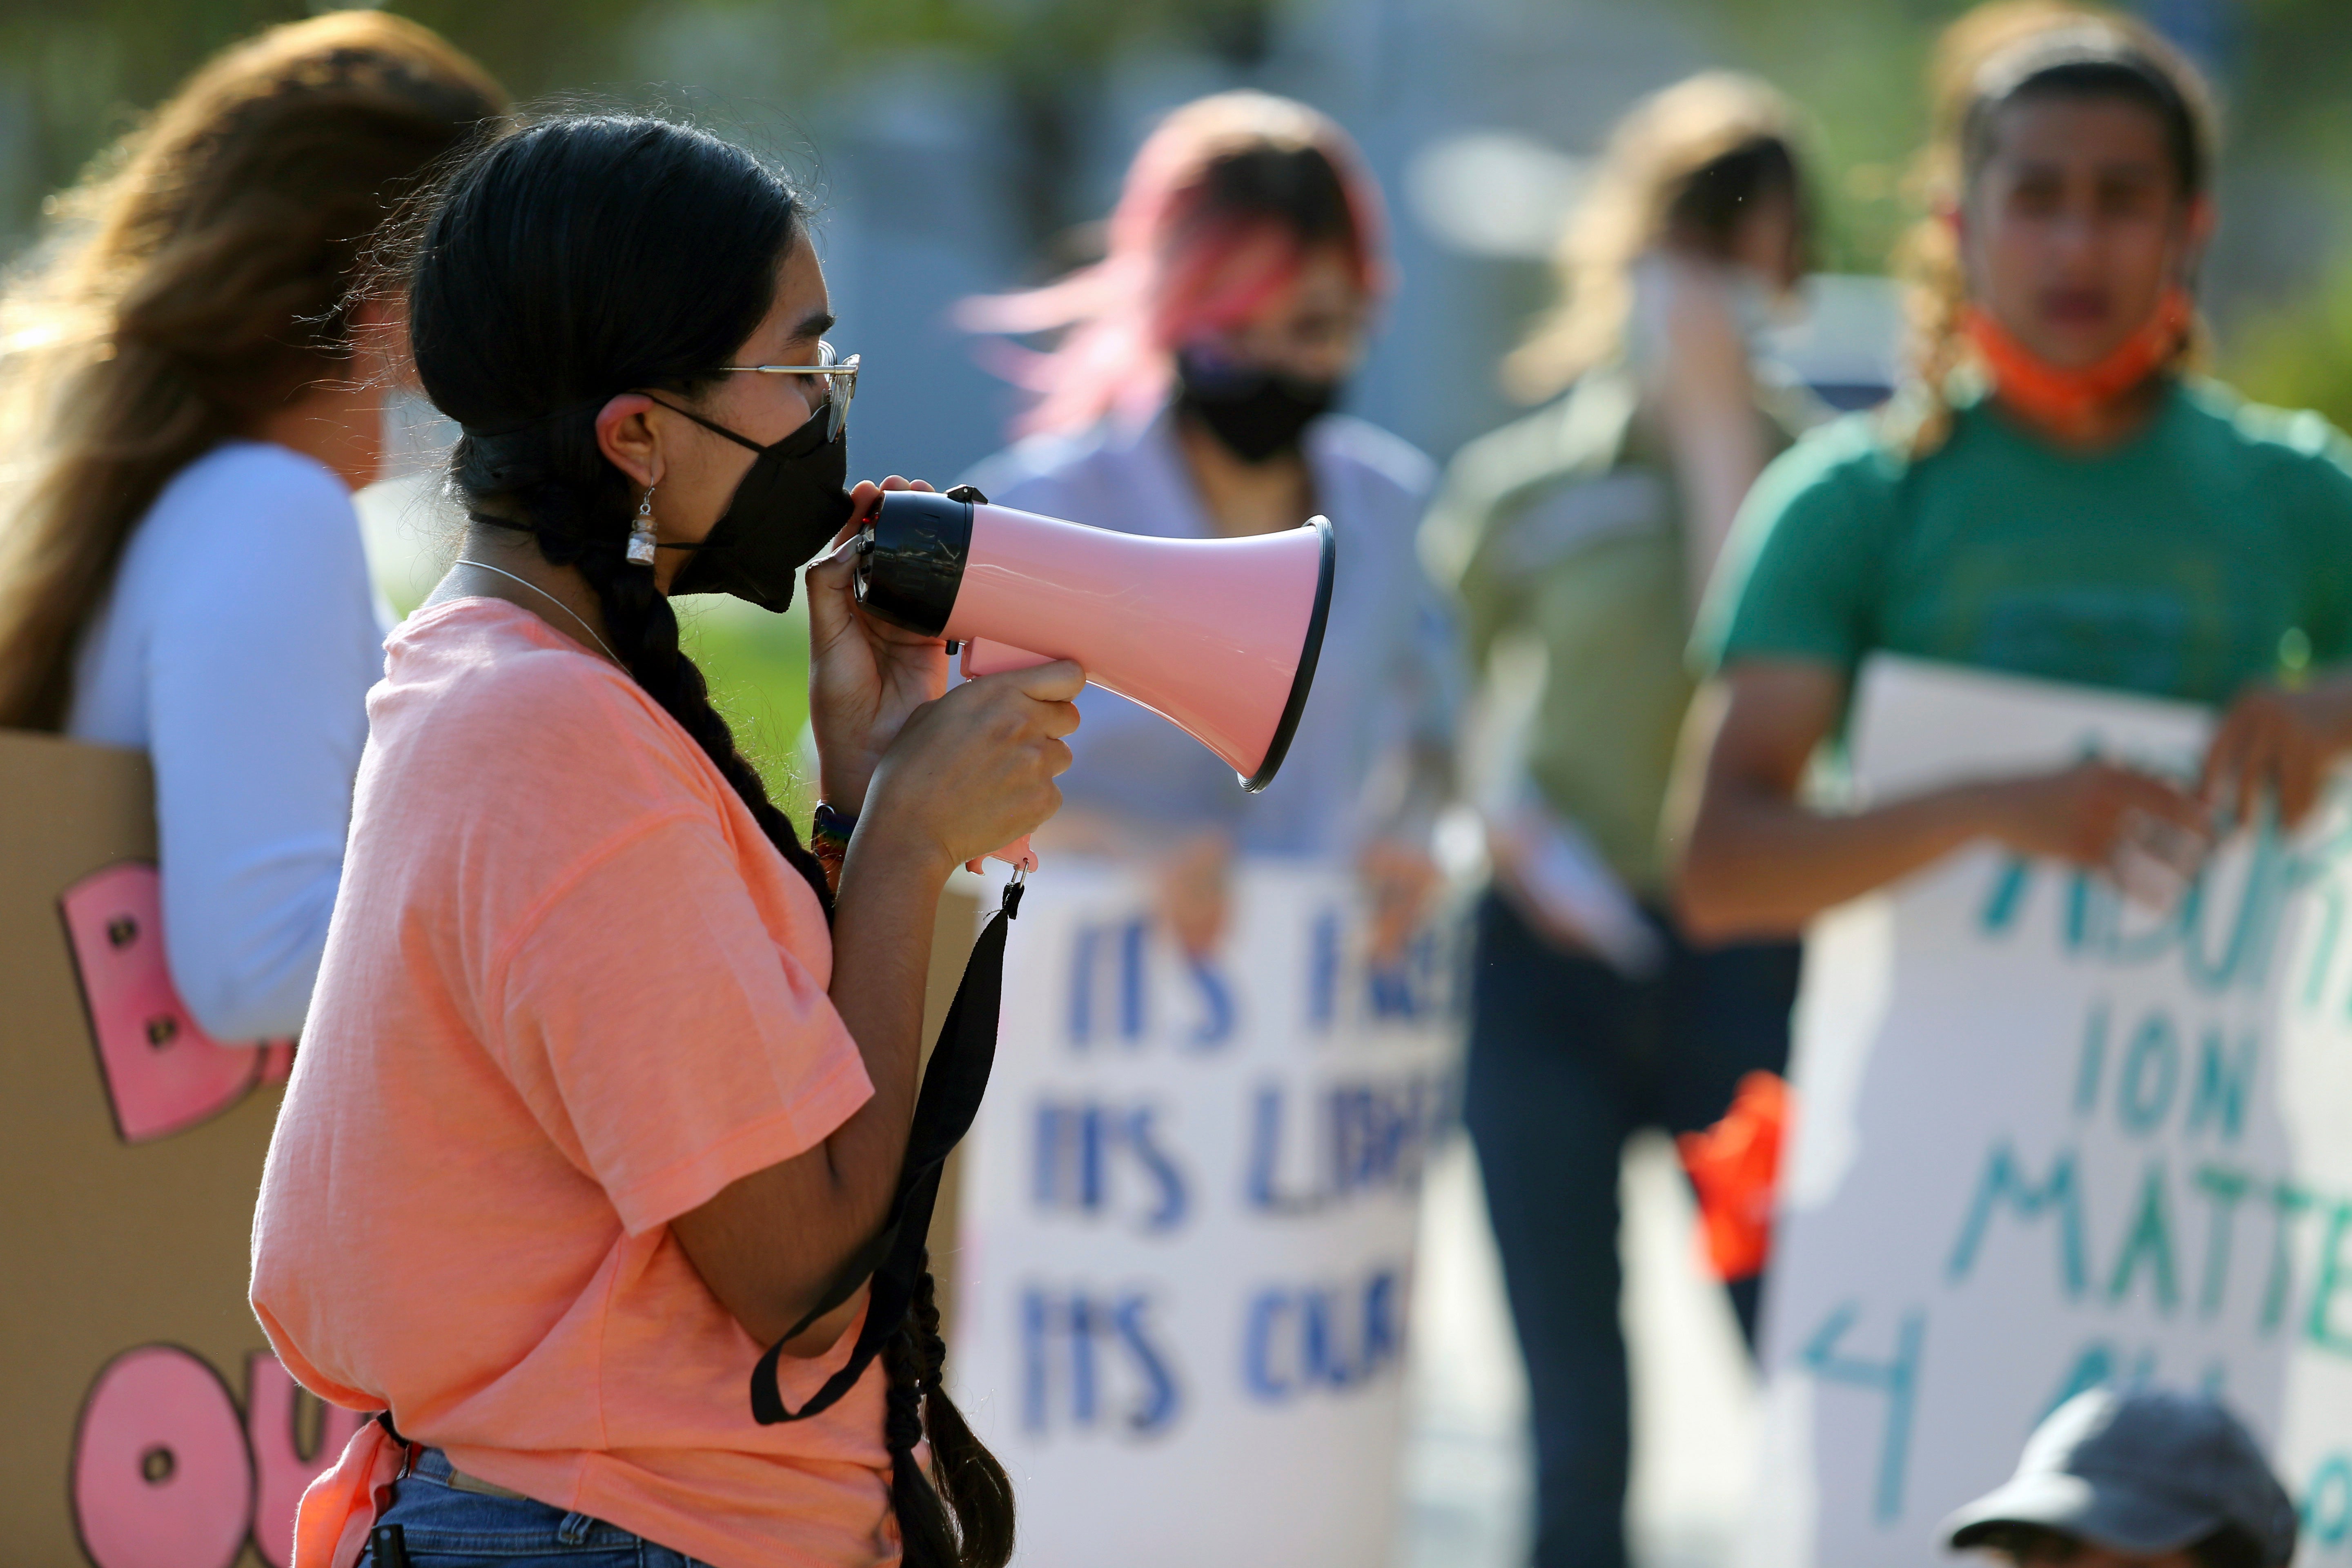 Abortion rights supporters gather to protest Texas SB 8 in front of Edinburg City Hall on Wednesday, Sept. 1, 2021, in Edinburg, Texas